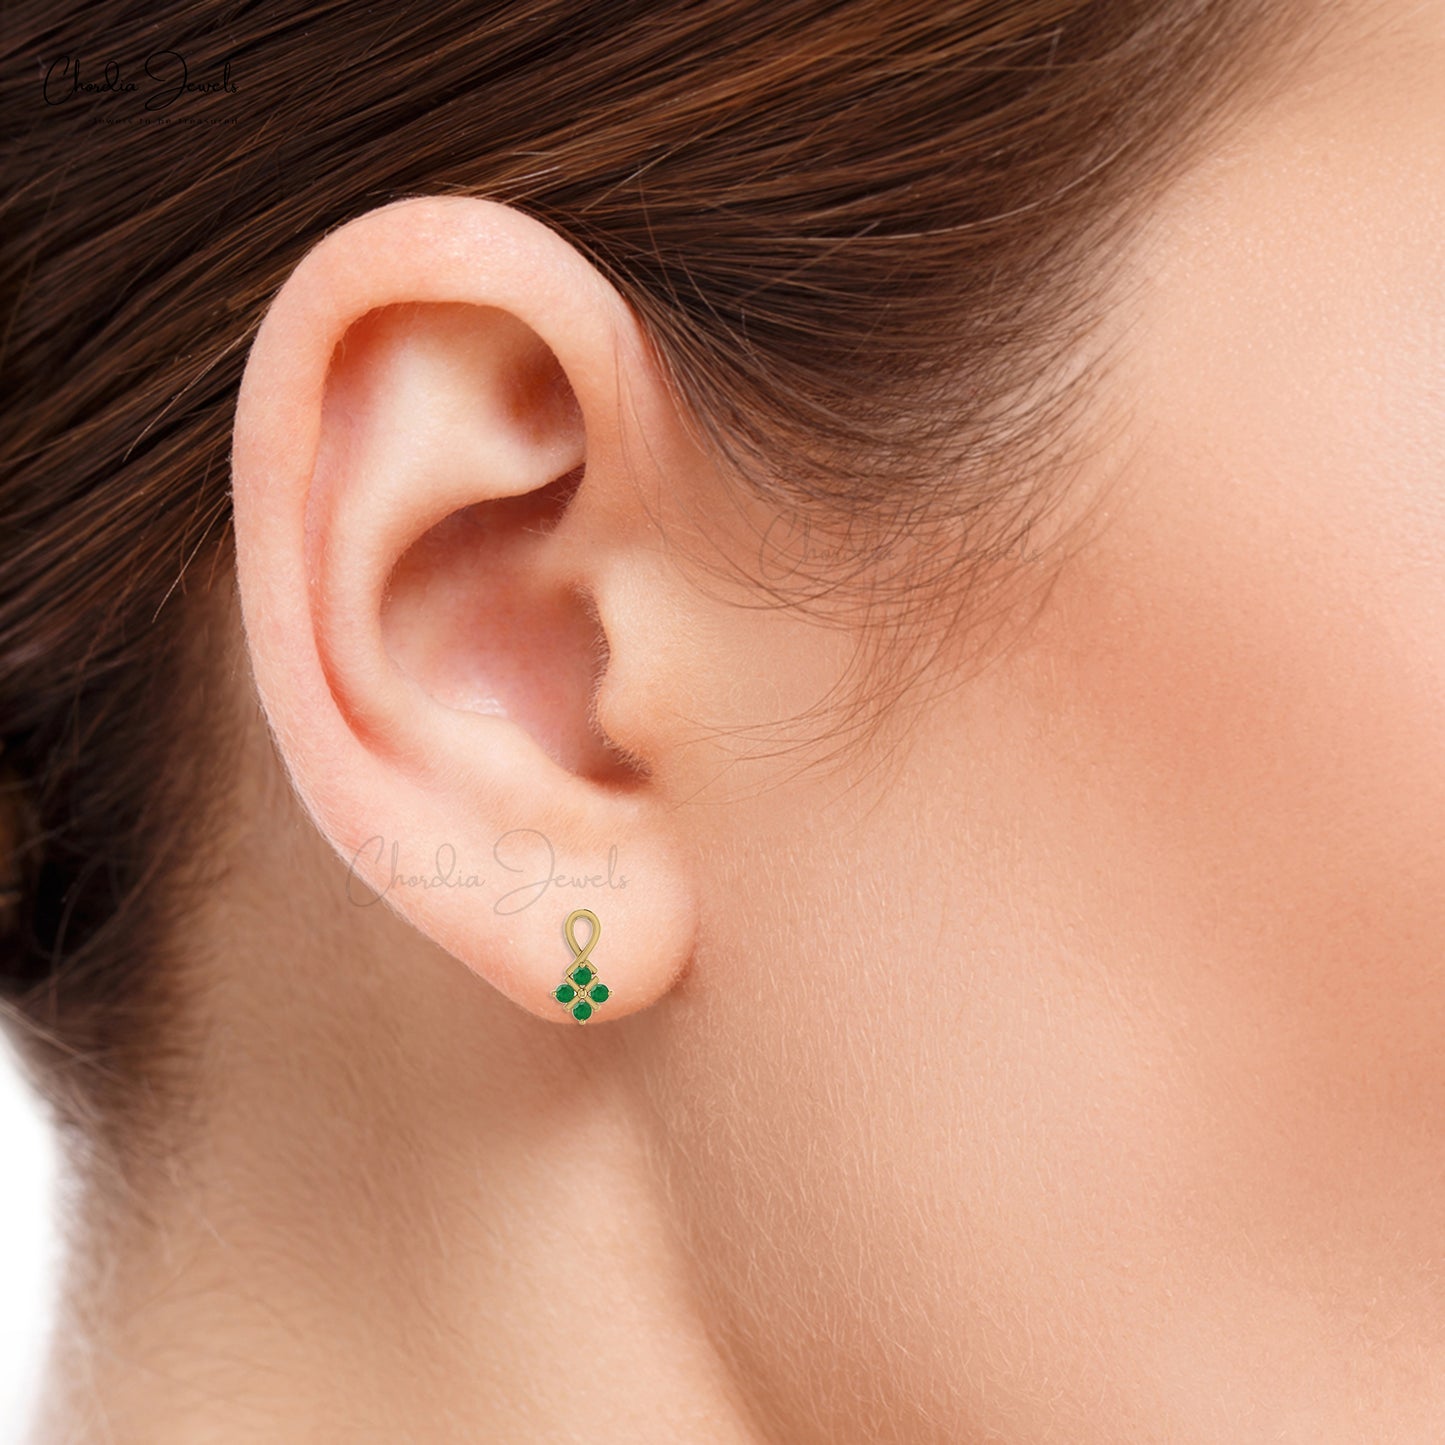 Indulge in the luxury of our small stud earrings.